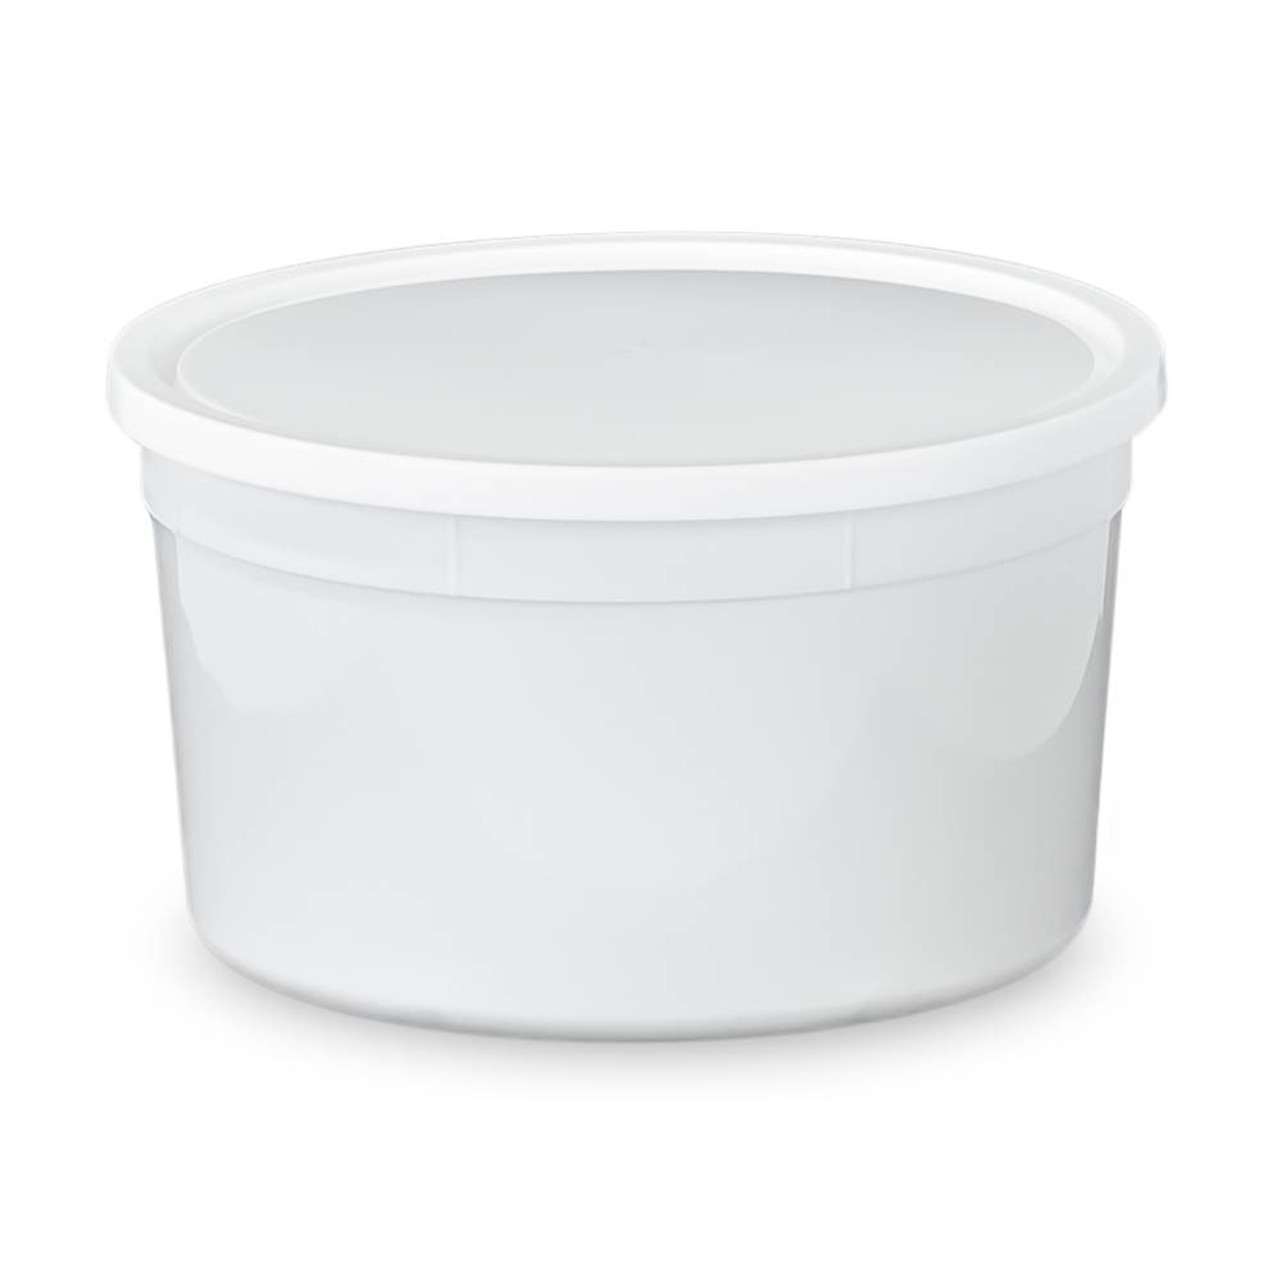 FOOD STORAGE CONTAINER 48 OZ ROUND 3 COLOR LIDS WITH PRINTED BOTTOM #FIESTA  1500 - Regent Products Corp.